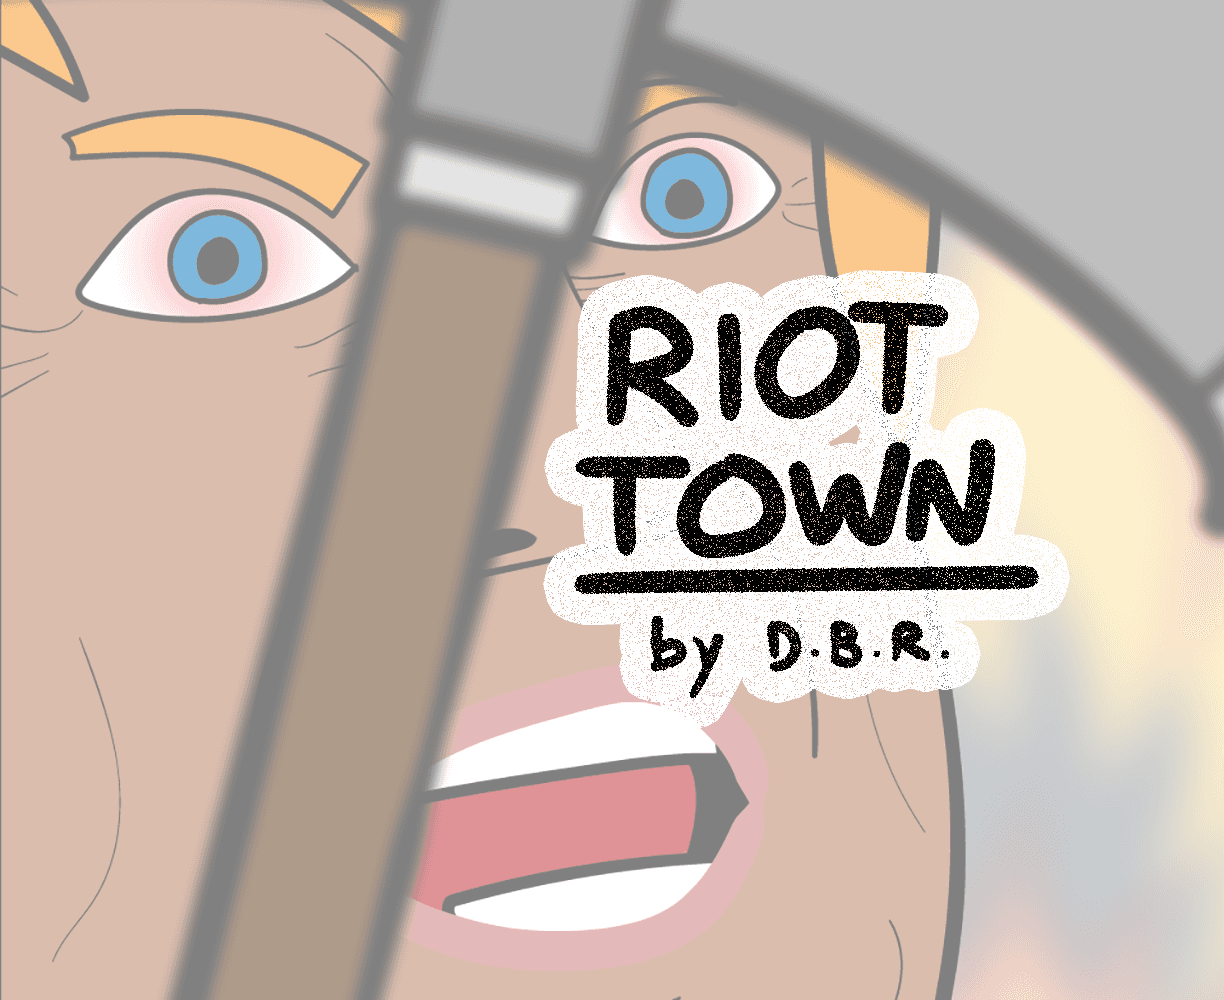 The cover art for the episode Bloodbath from the comics series Riot Town, USA, which is number 51 in the series